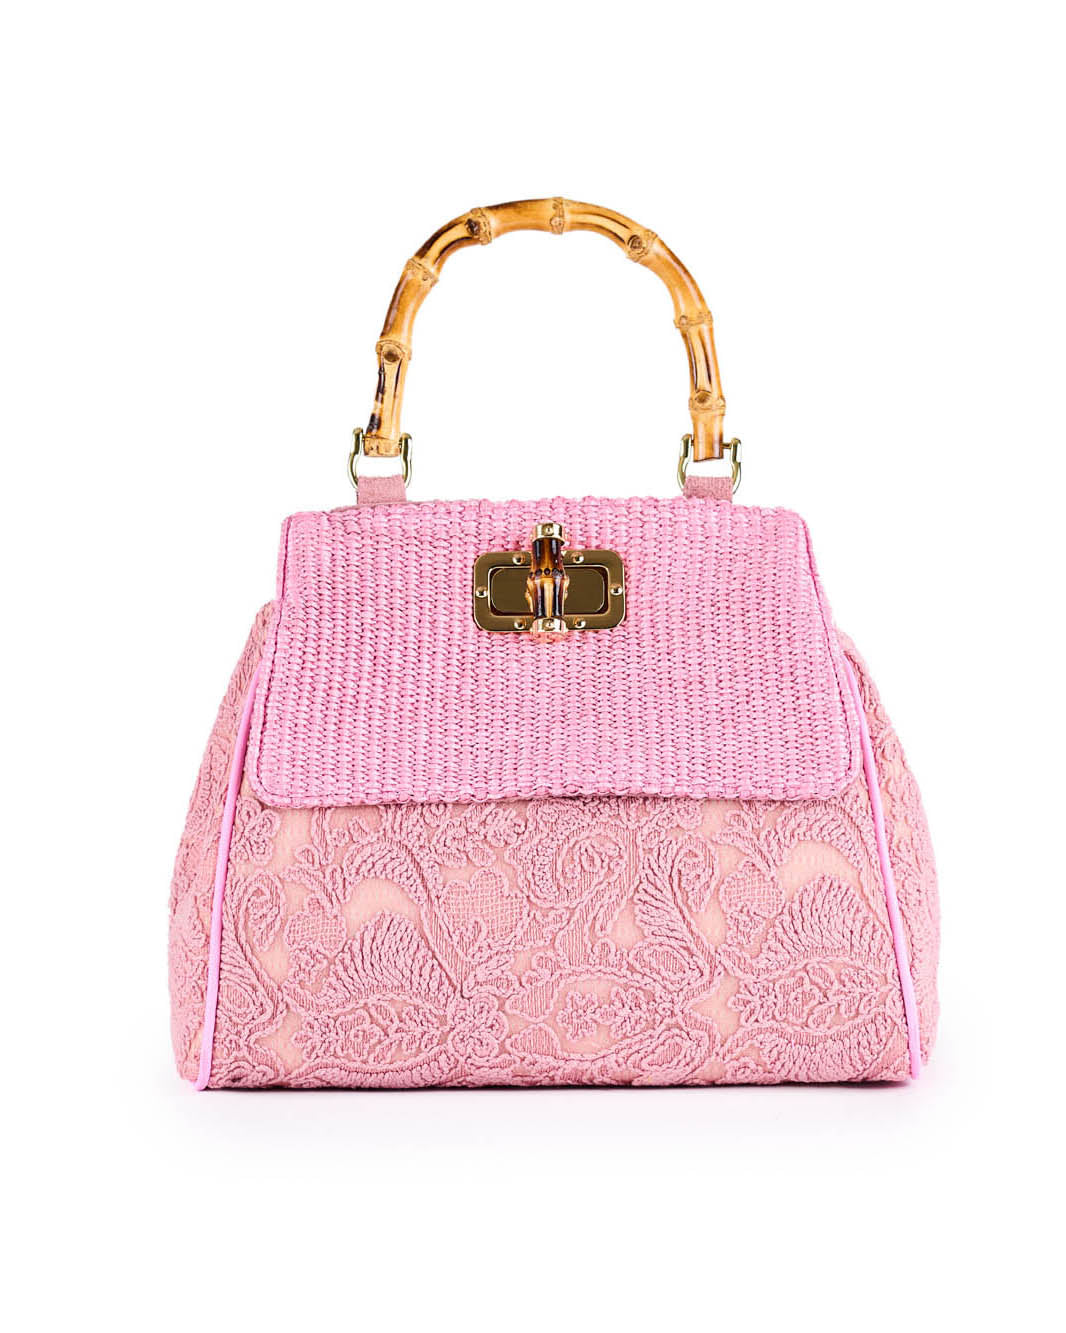 Pink woven handbag with bamboo handle and lace detailing